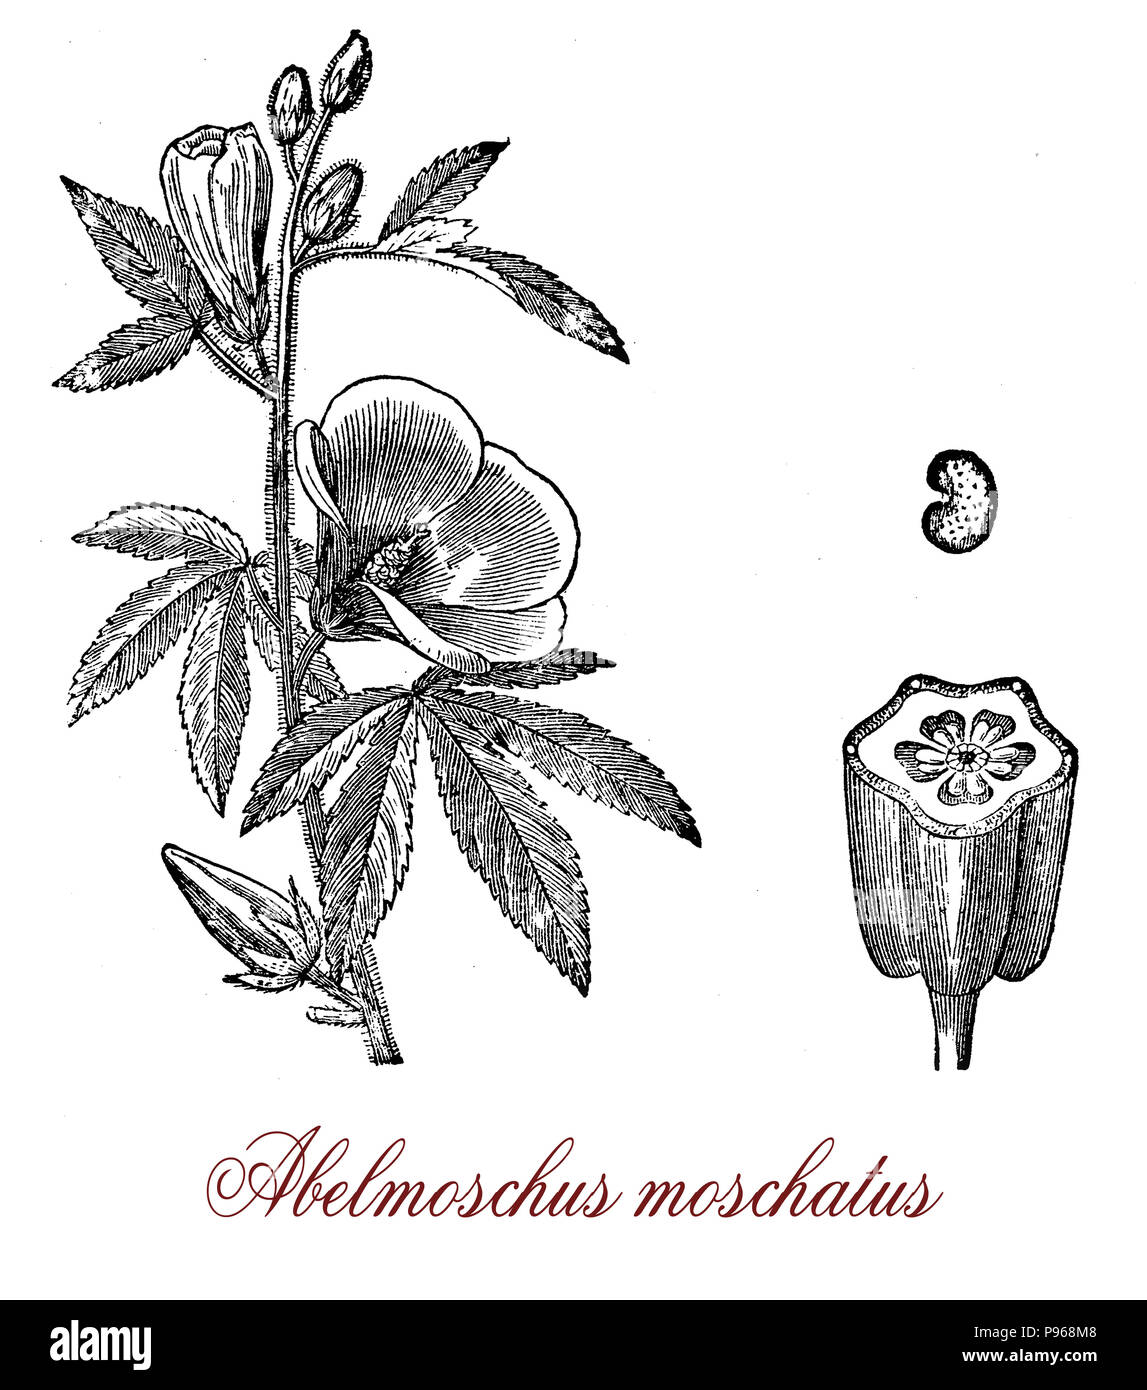 Vintage engraving of musk mallow, aromatic and medicinal plant native to Asia and Australia Stock Photo